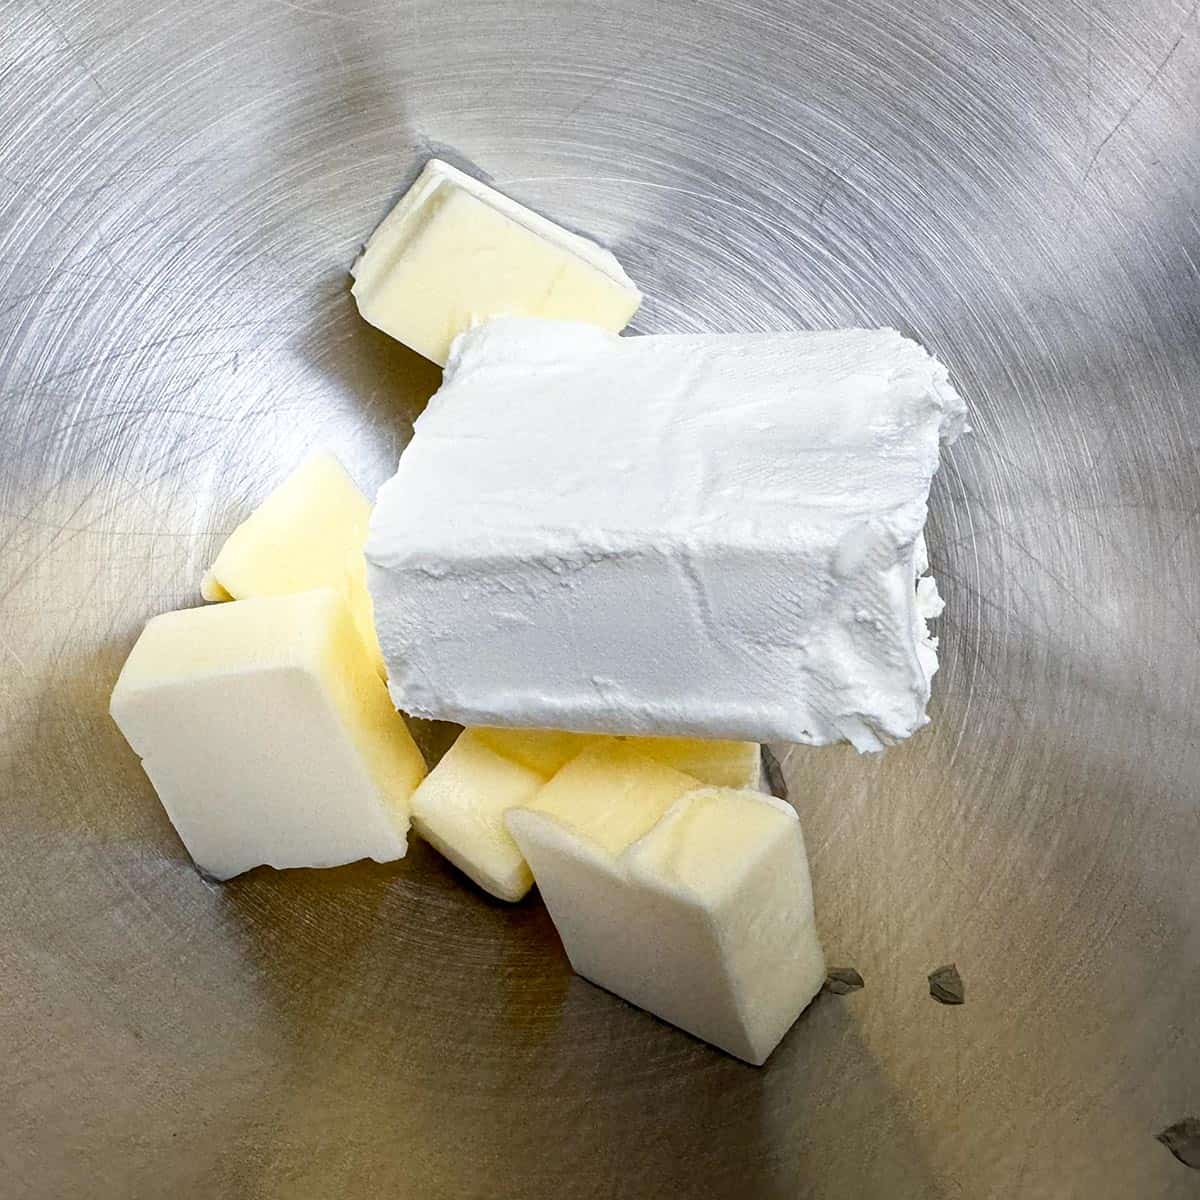 Cubed butter and a block of cream cheese getting ready to be blended in a mixer bowl.